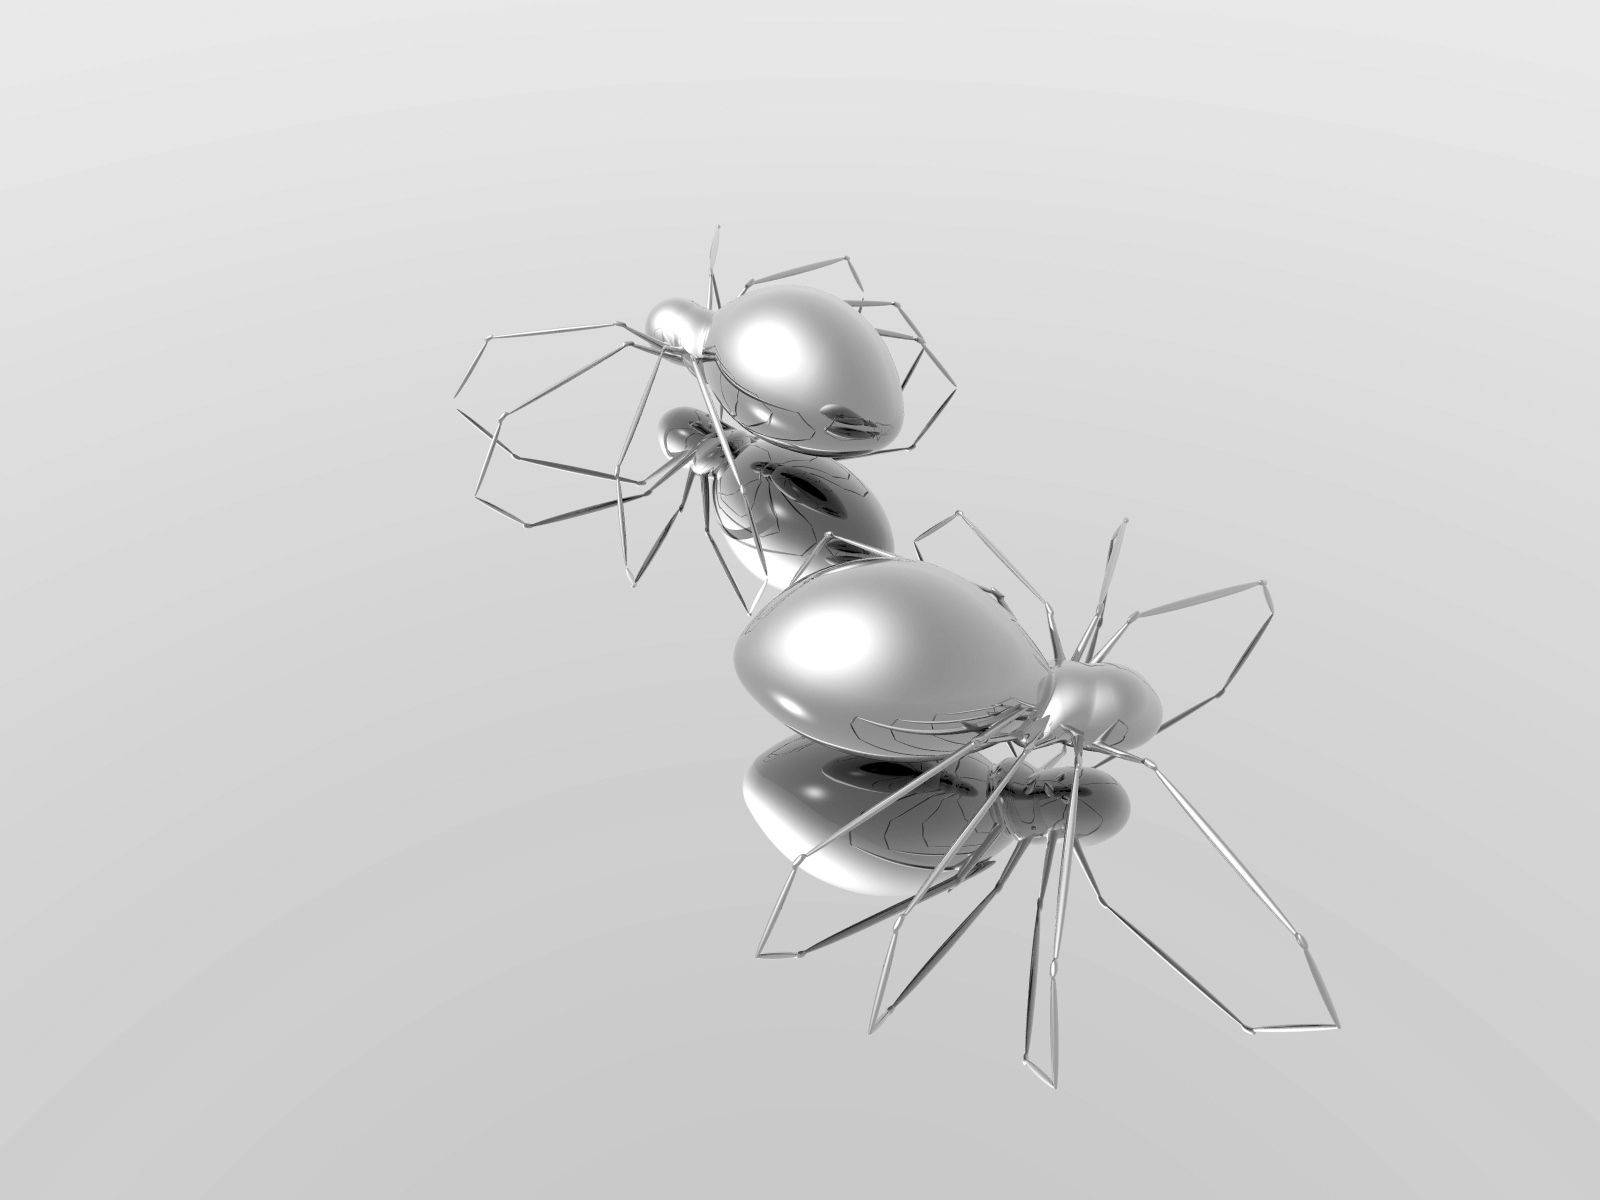 Two Silver Robot Spiders Background